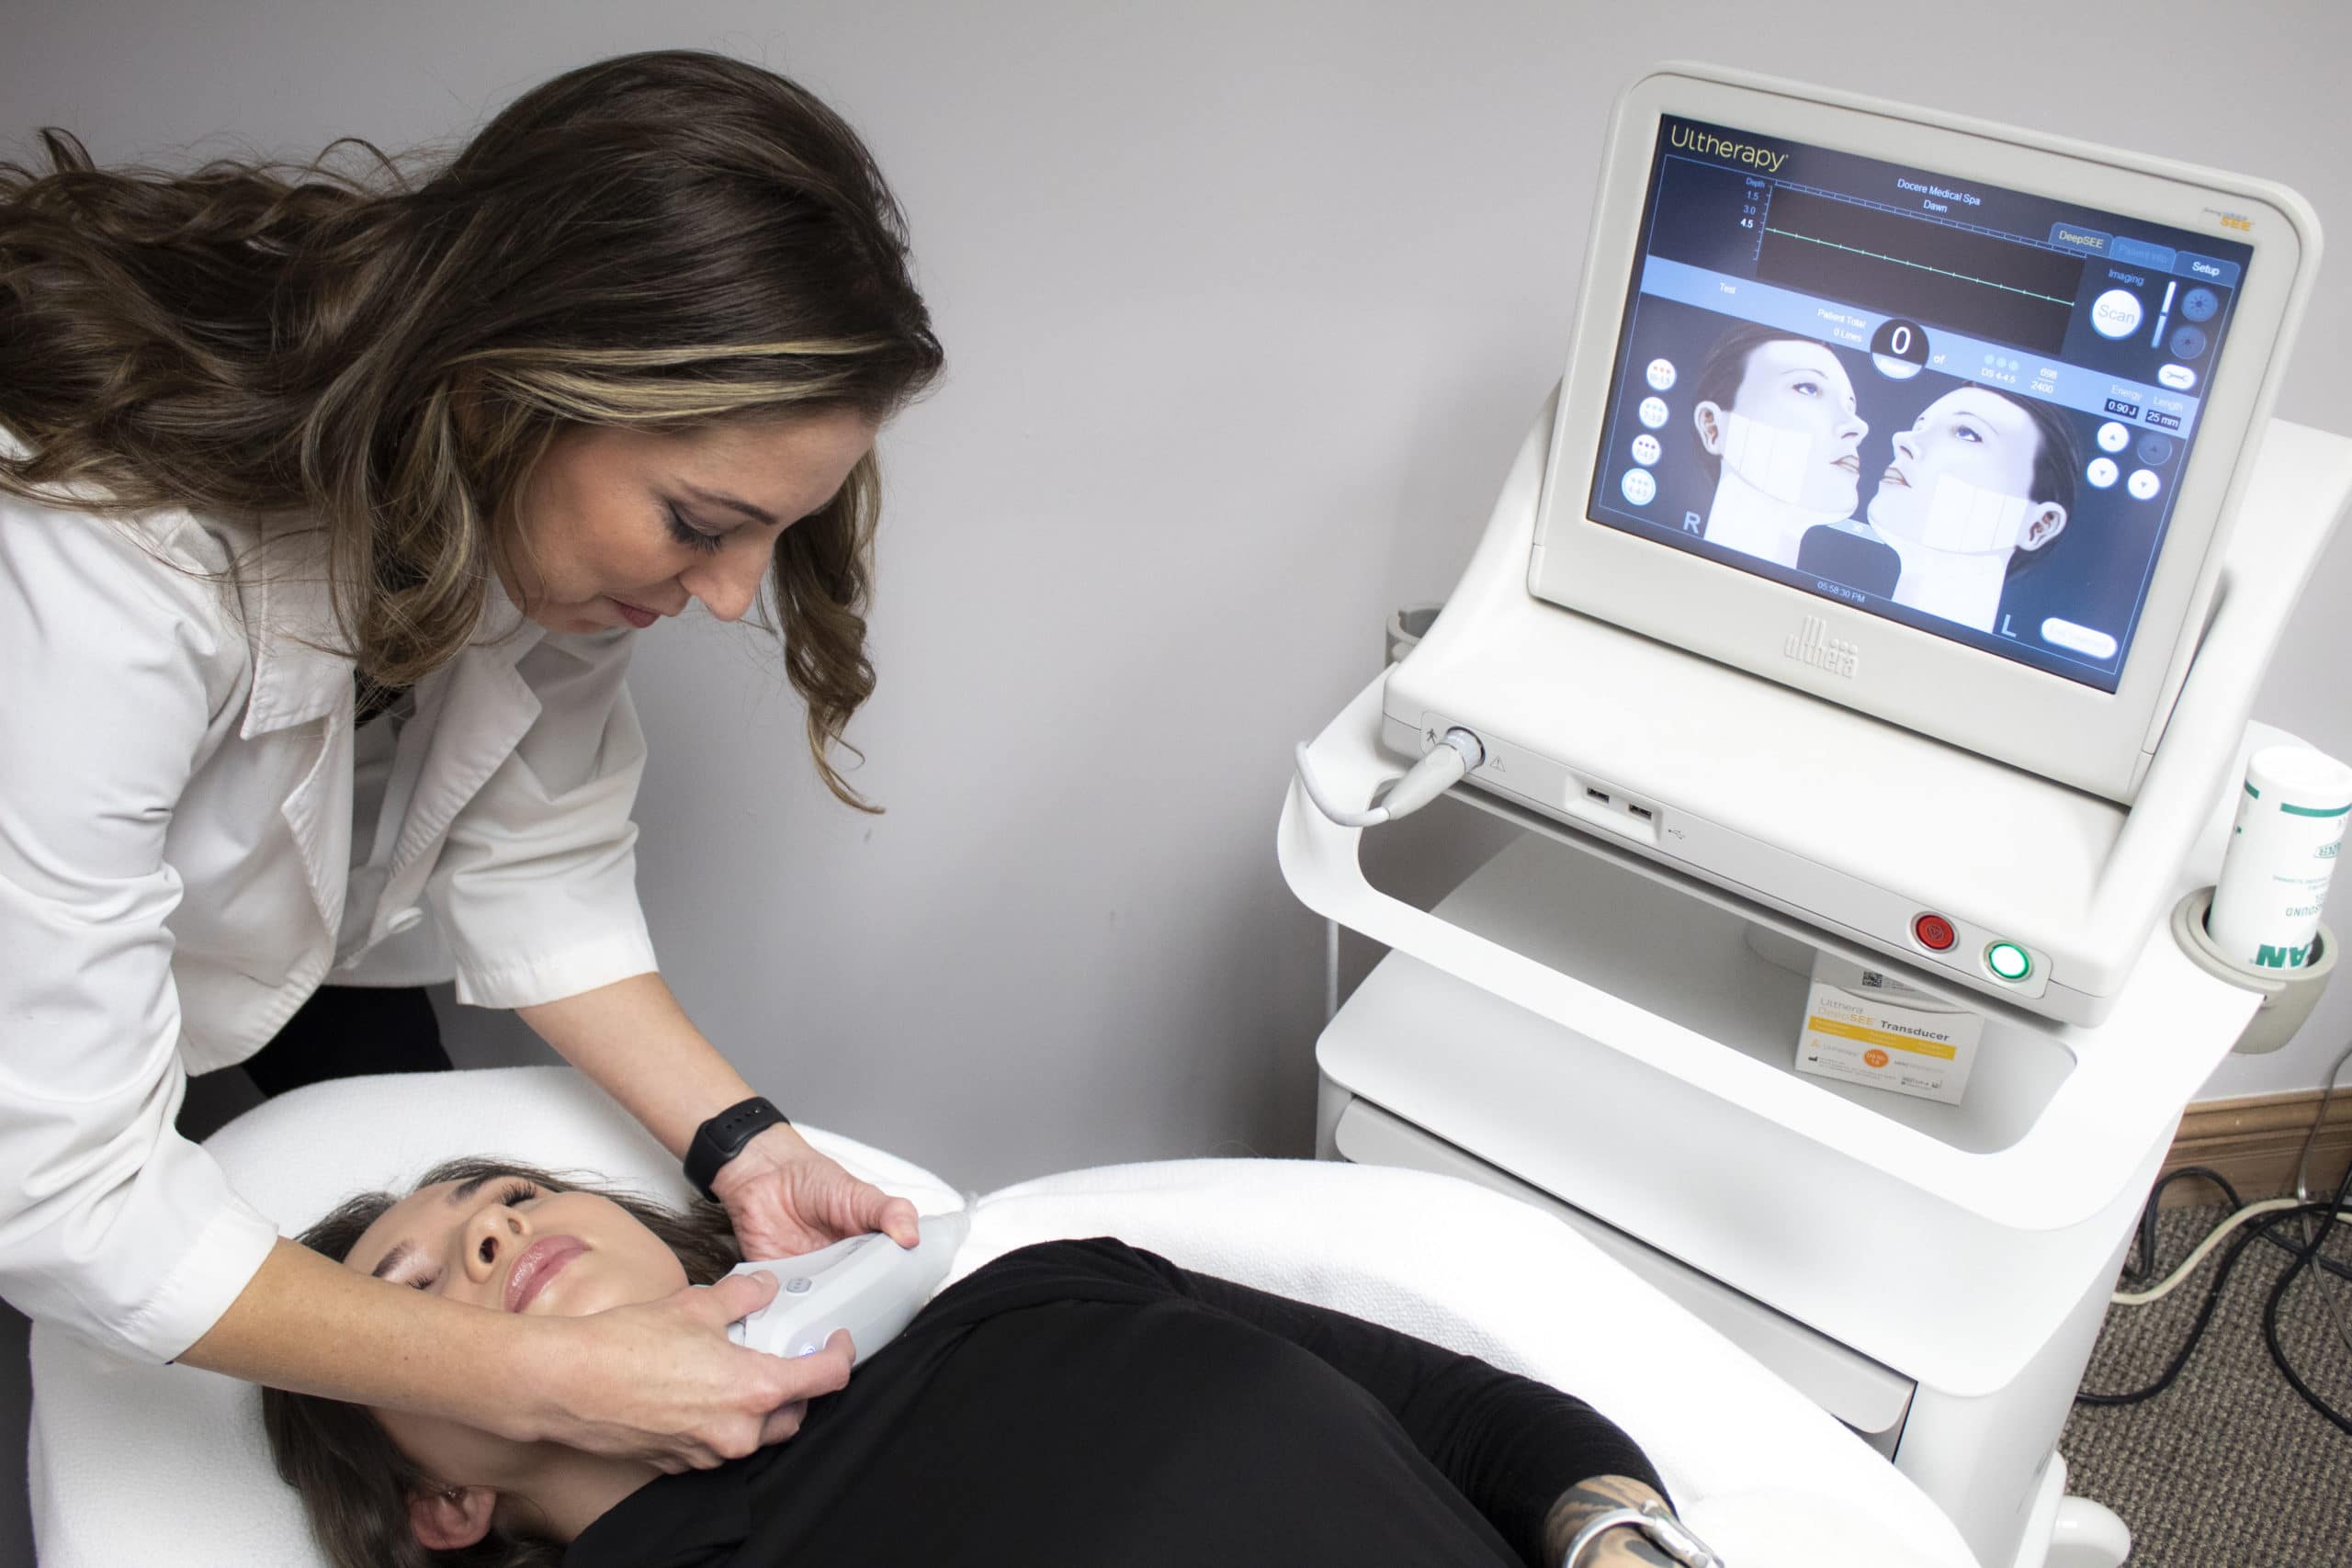 Expert of Docere Medspa performs an Ultherapy treatment for a female patient.